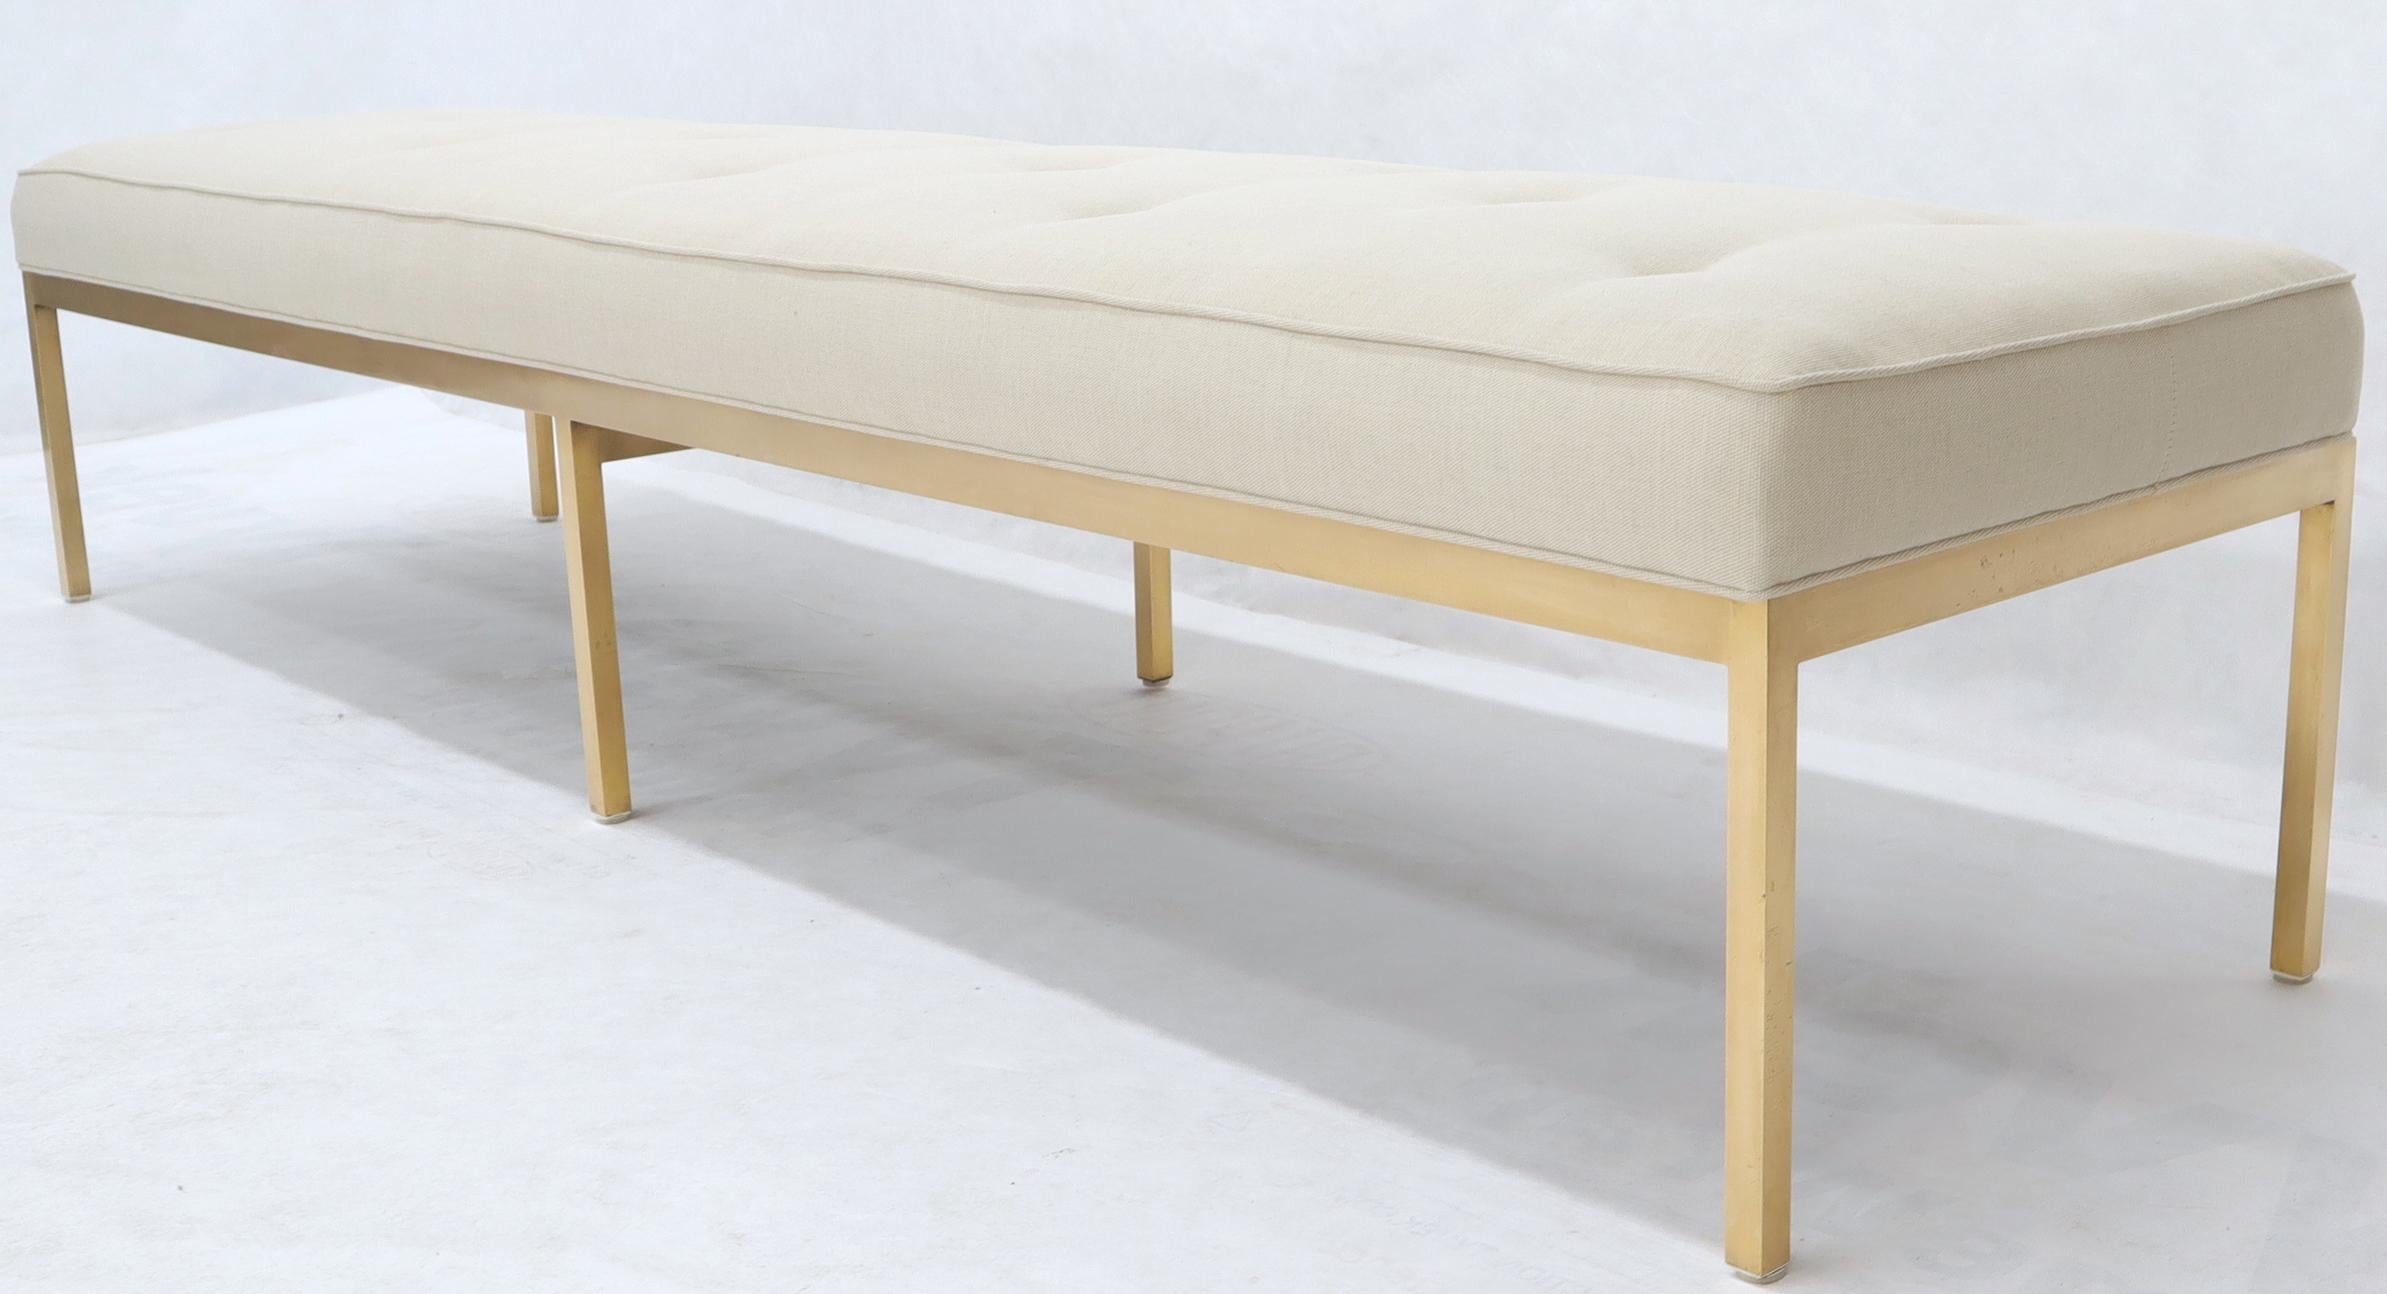 Mid-Century Modern solid brass frame profile new upholstery super comfortable spring loaded mattress like seat cushion bench or daybed.